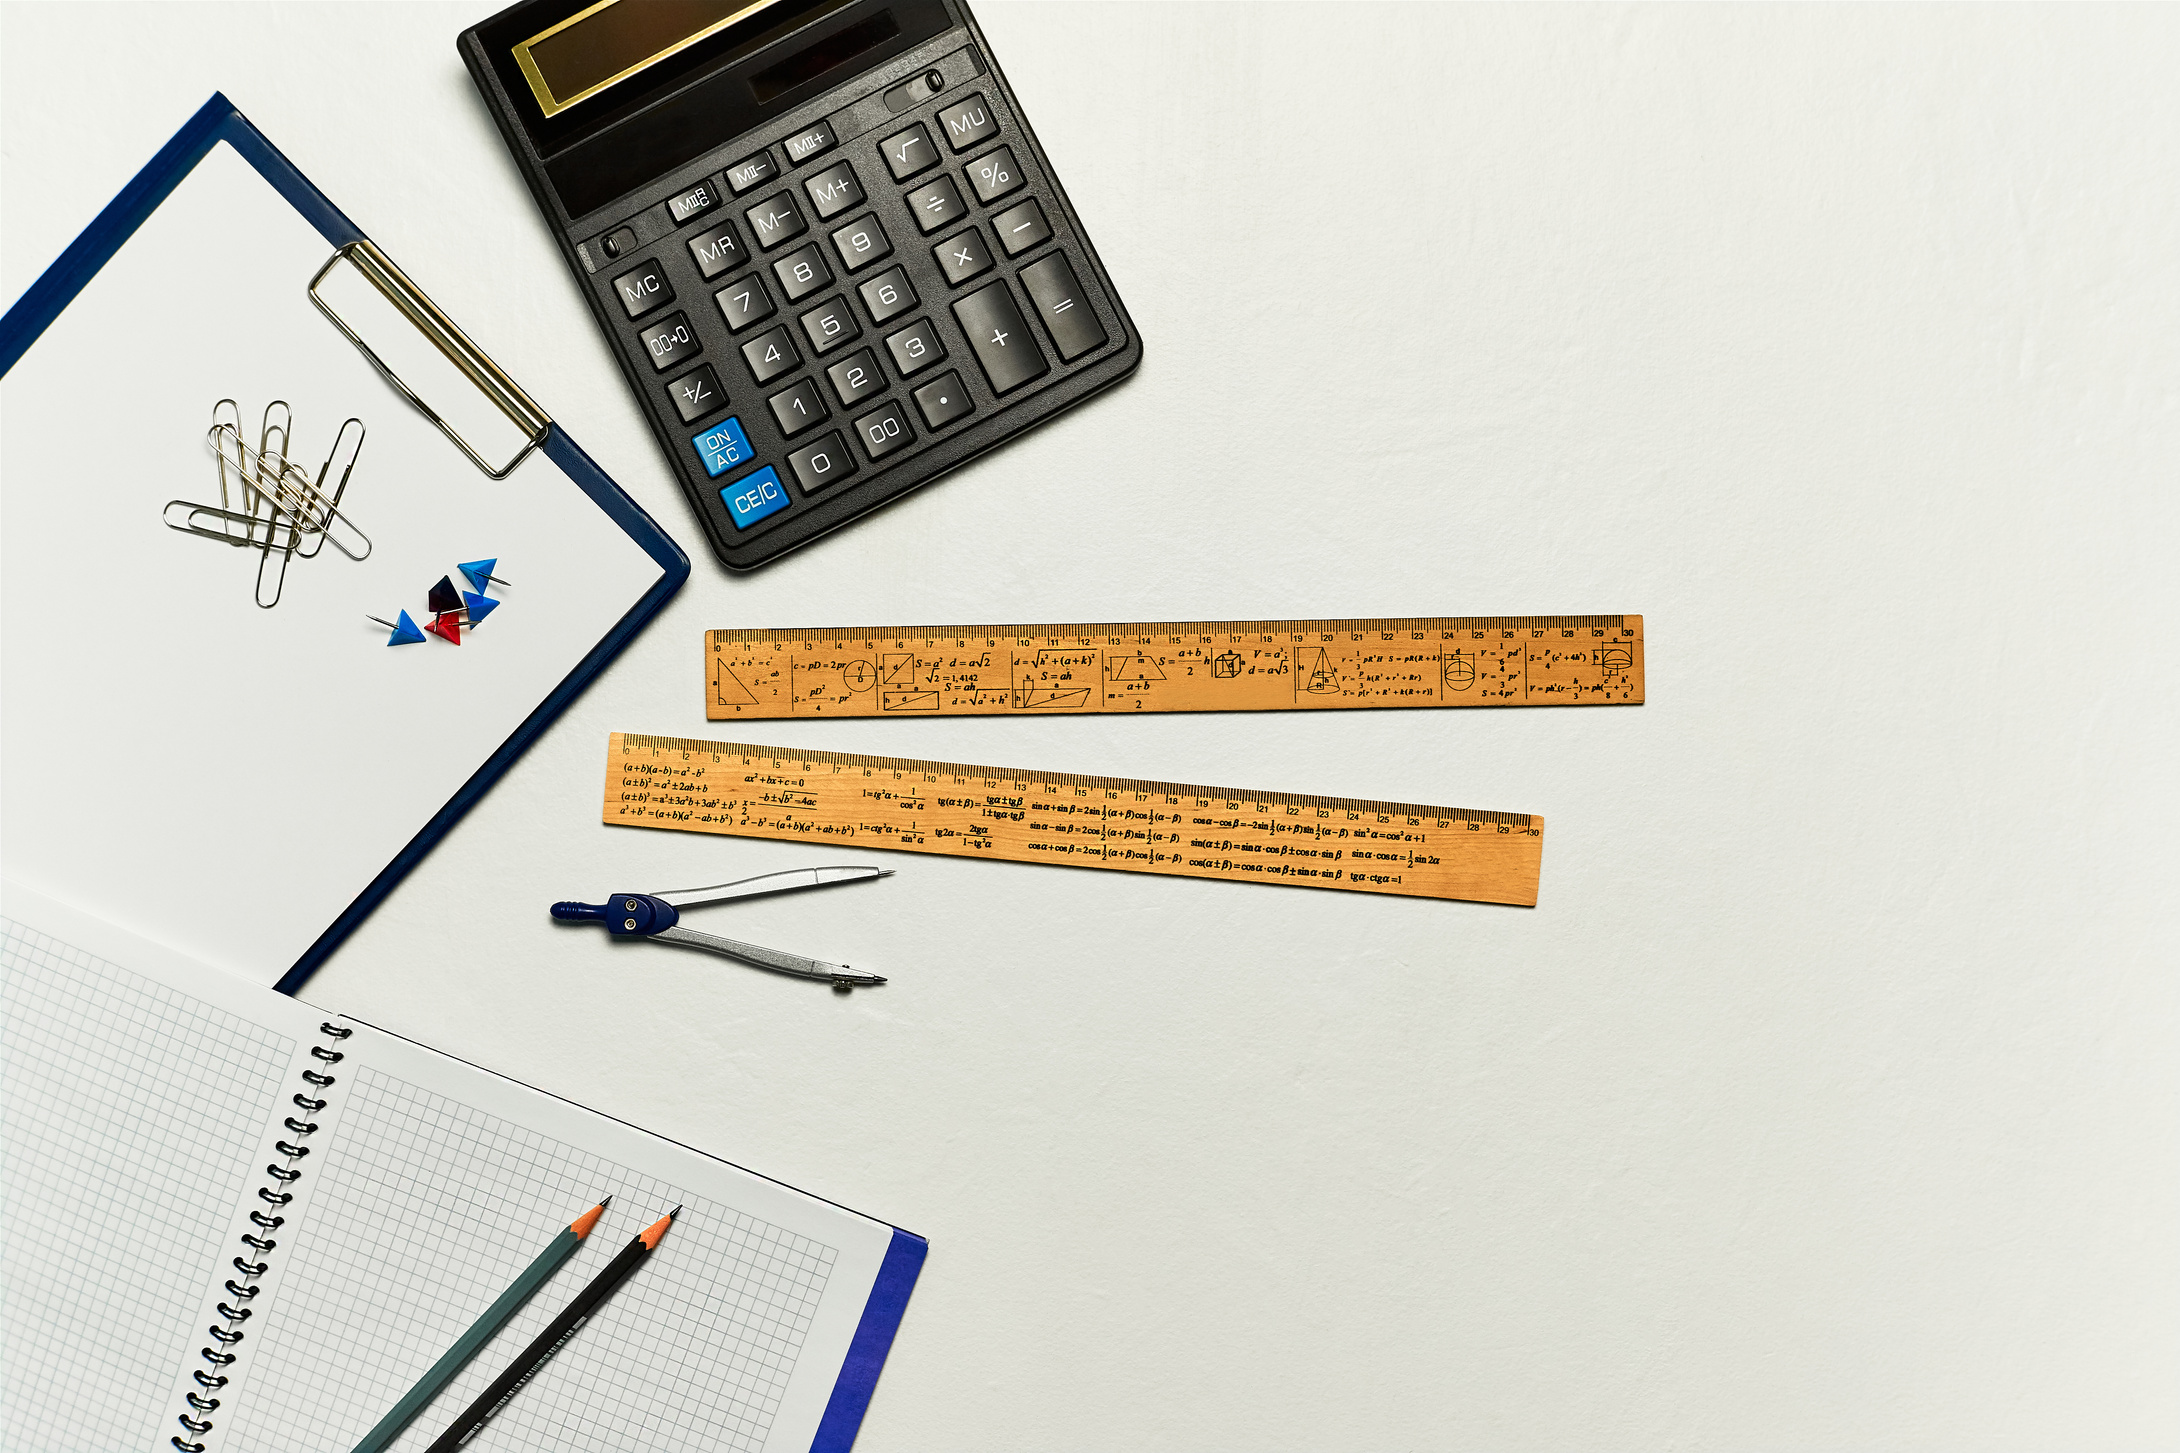 Math concept. School supplies used in math, geometry or science.